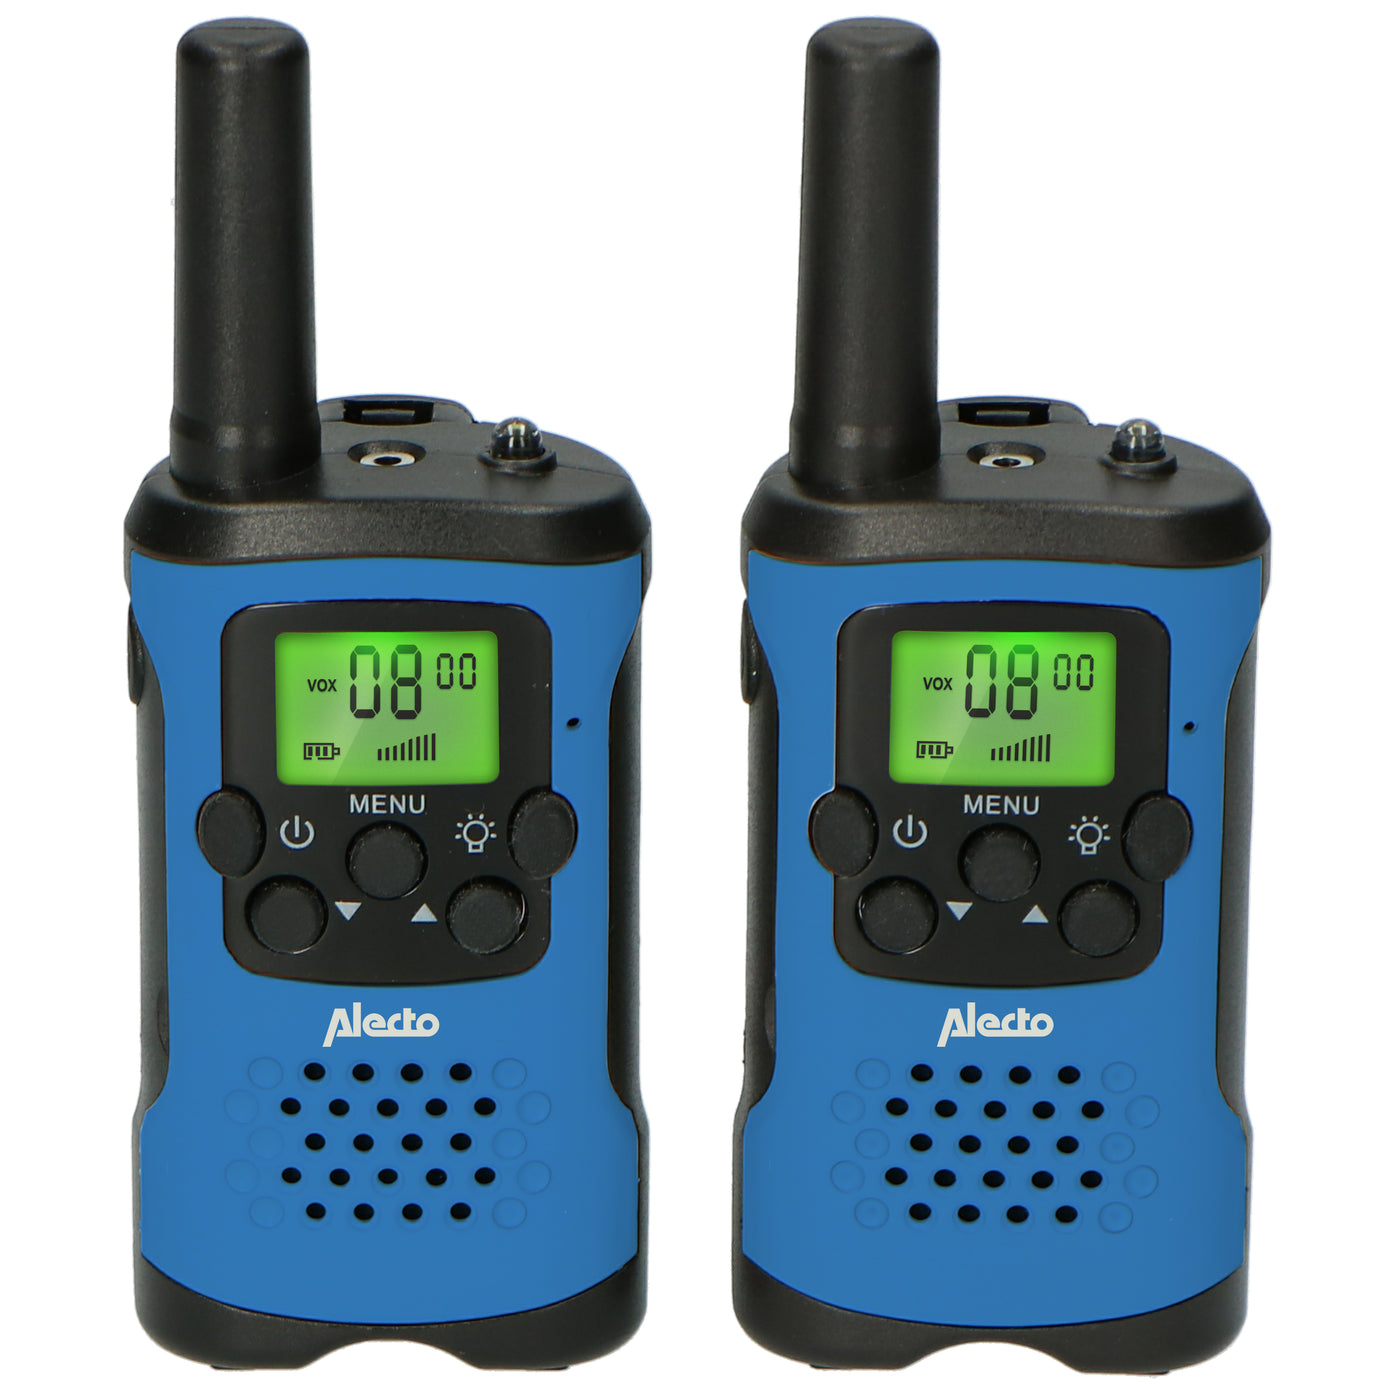 Alecto FR-115BW - Set of two Two-Way radios for children, range up to 7 kilometers, blue/black